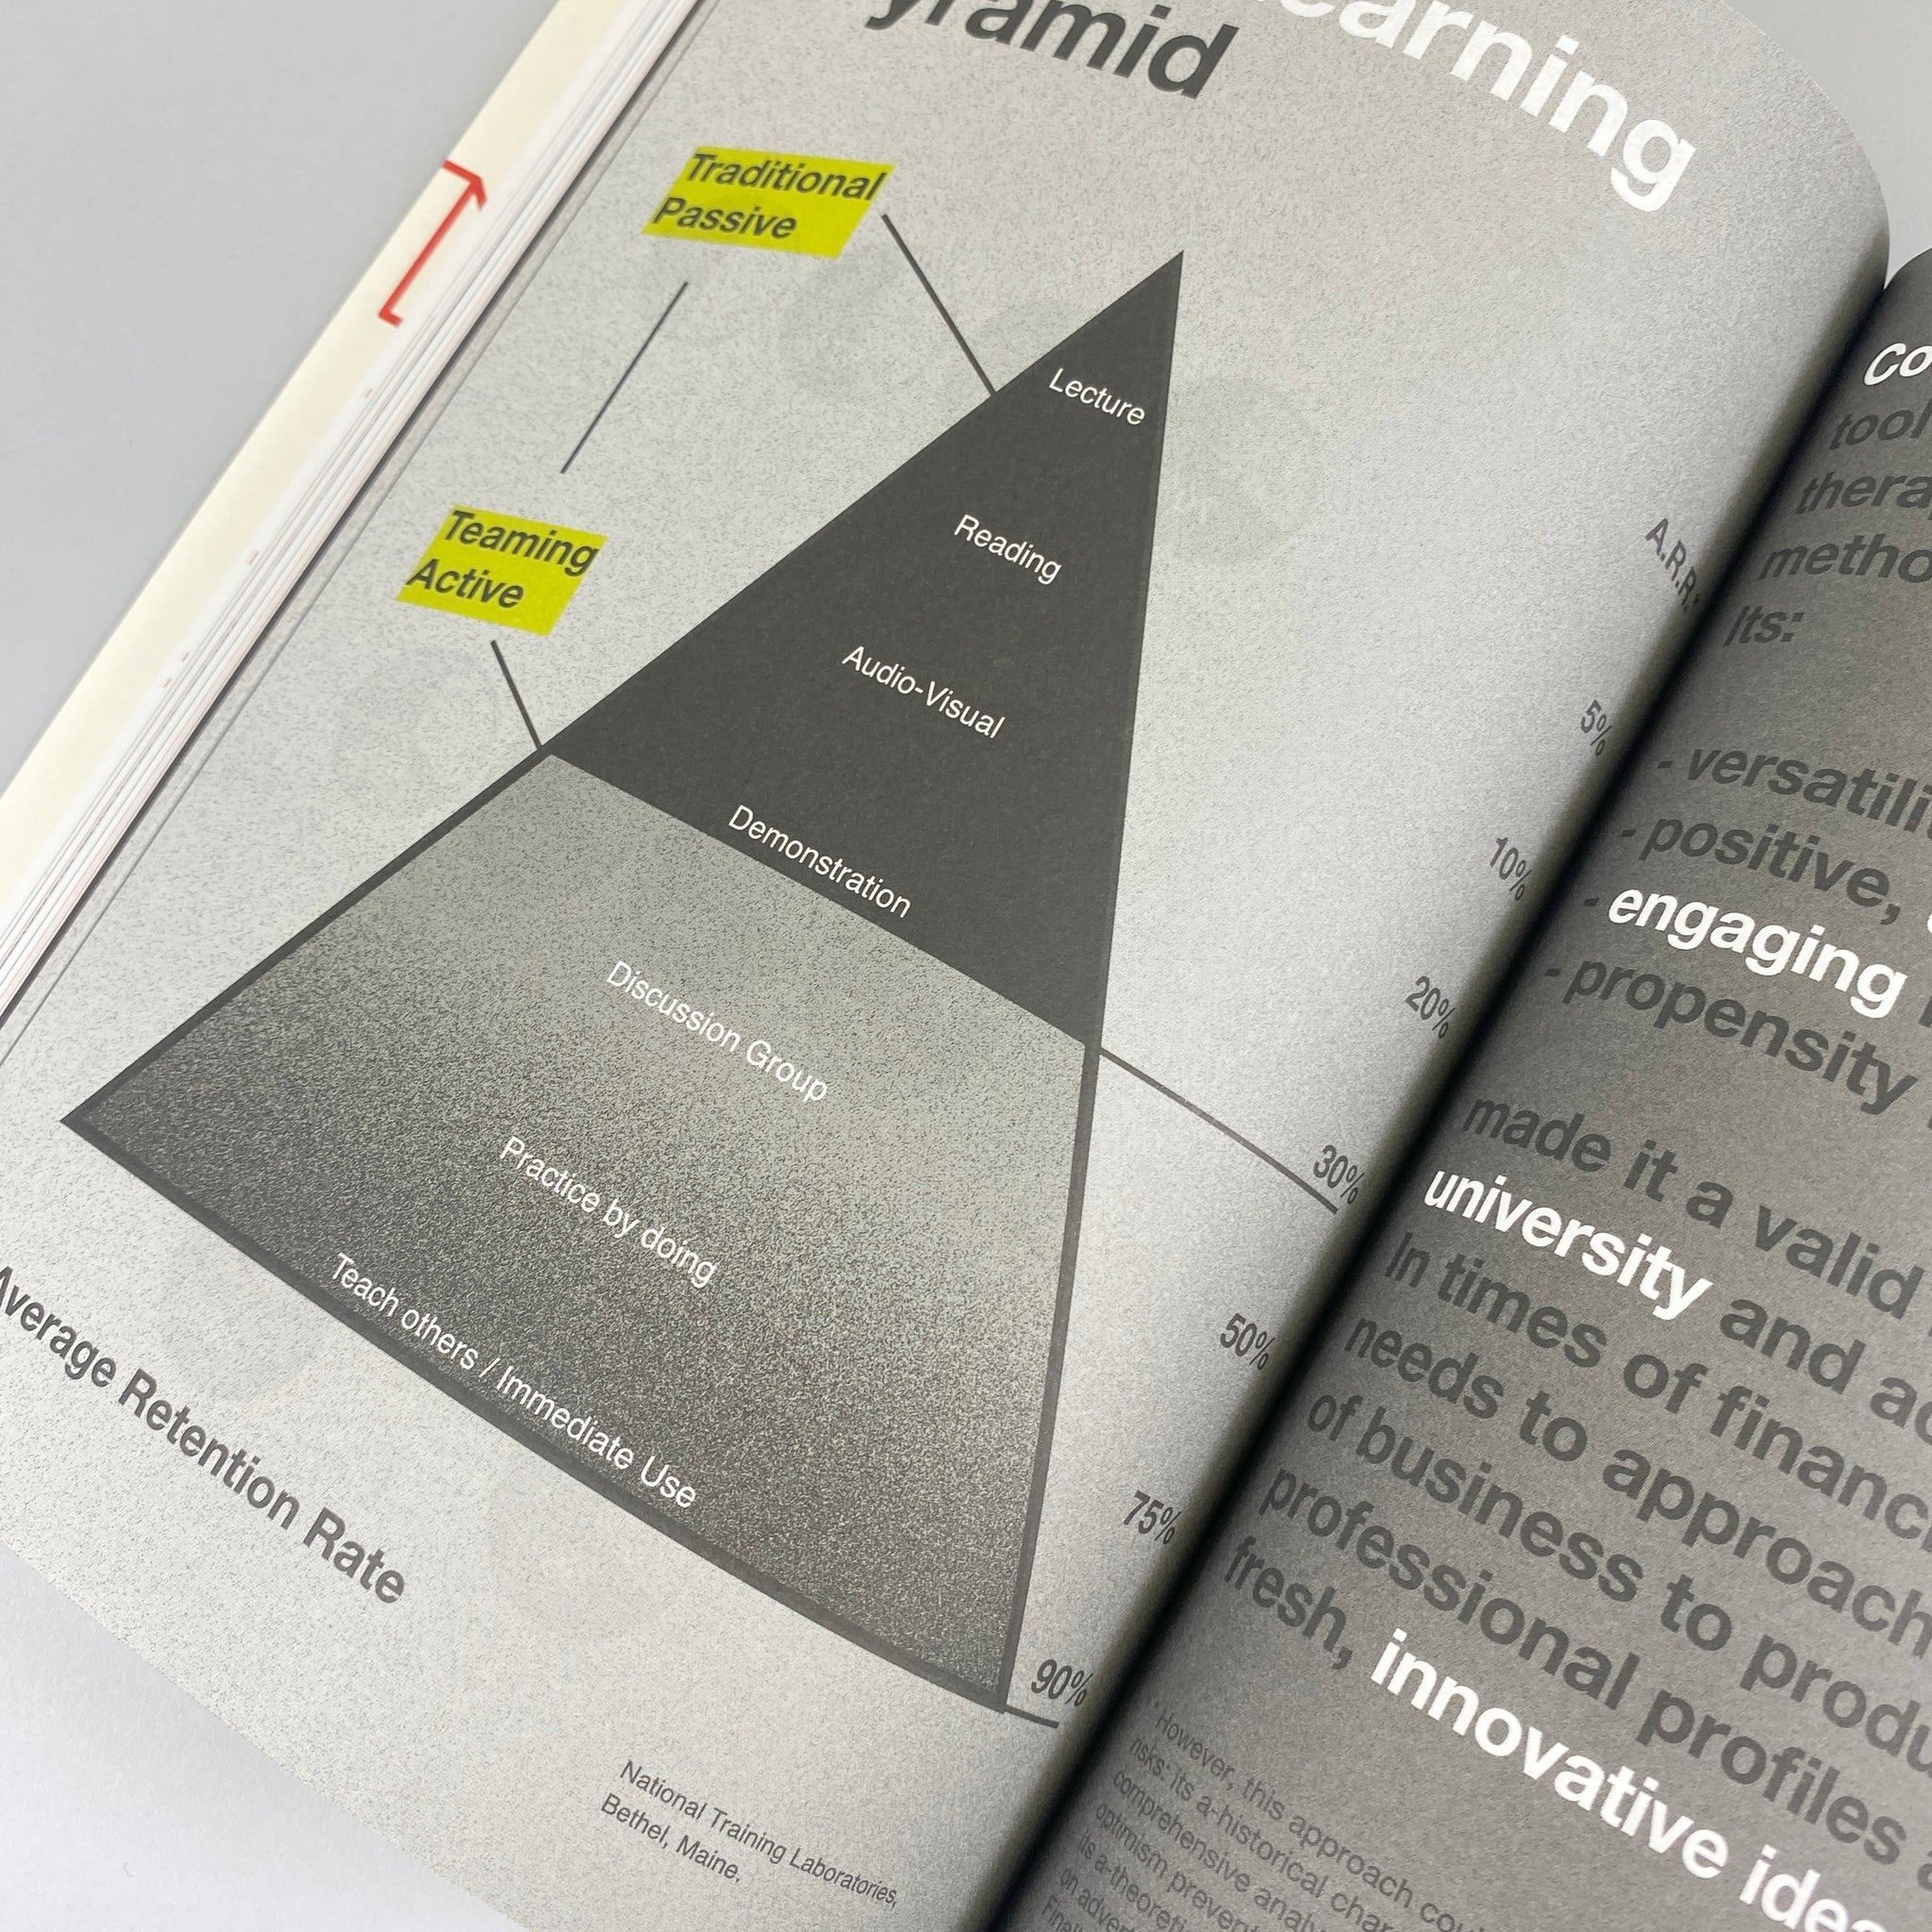 About Learning and Design